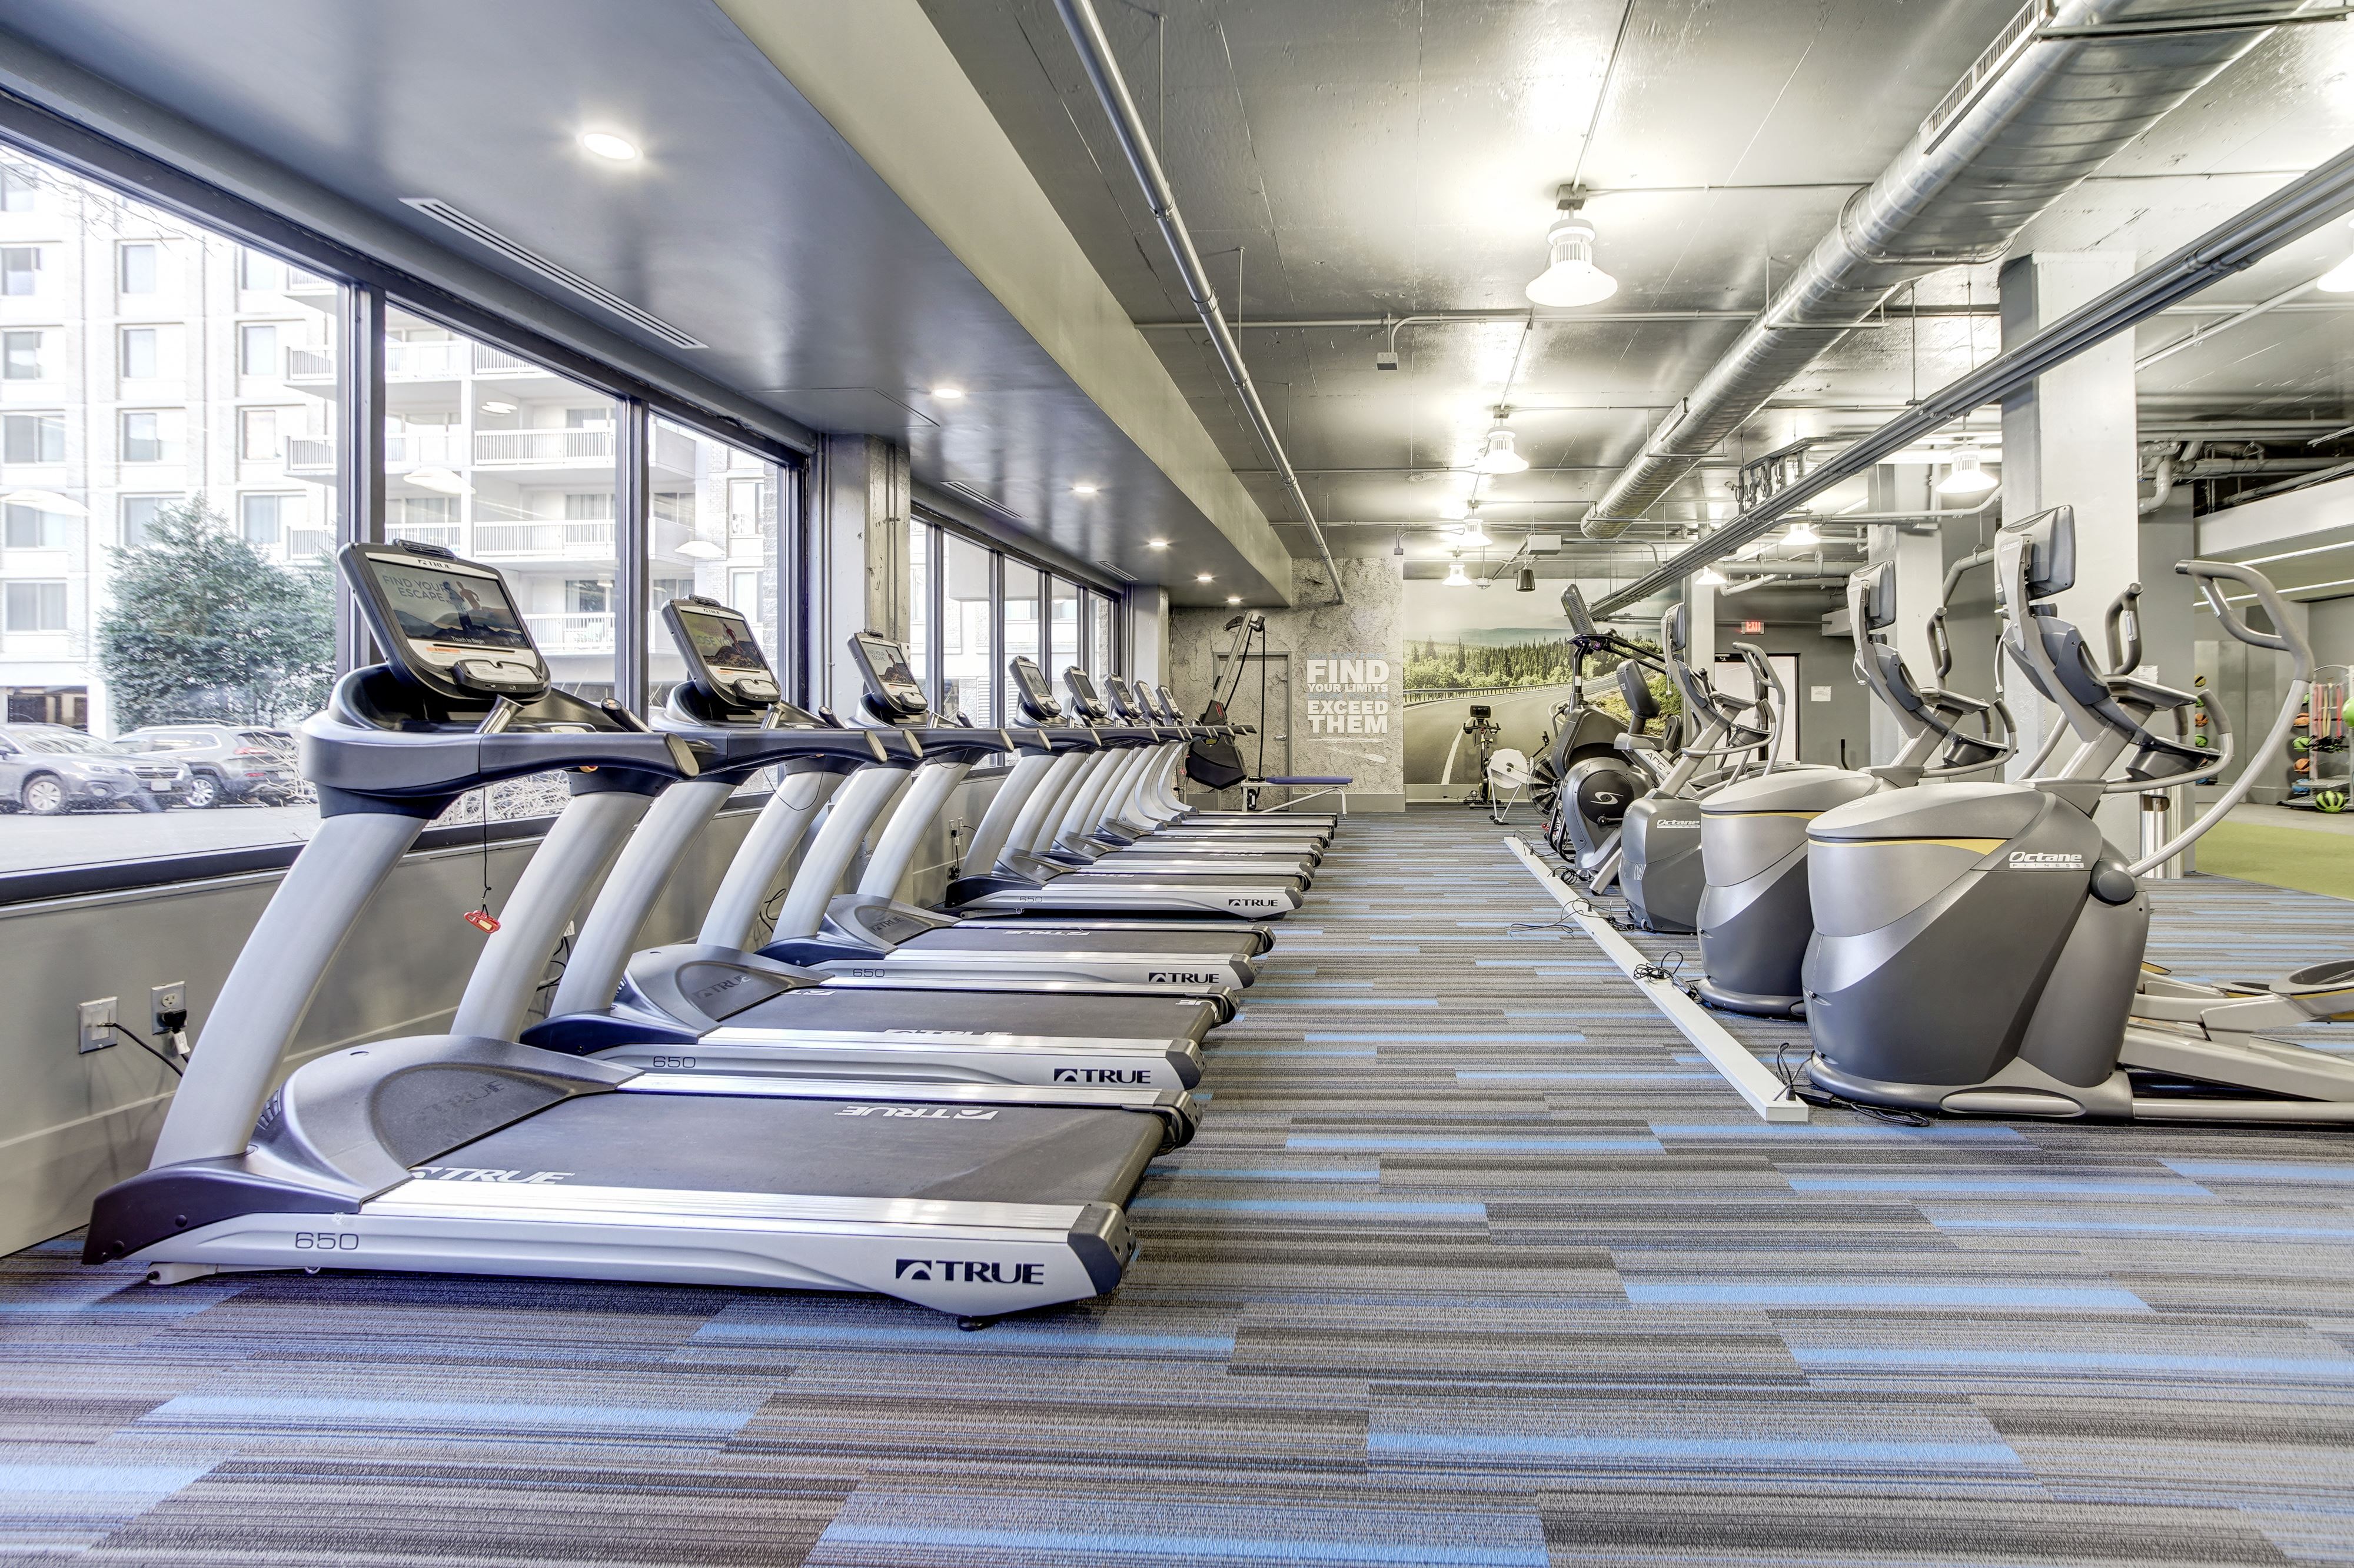 3,800 Square Foot, 24-Hour Fitness Center with Cardio and Free Weights (No Need for a Gym Membership!) 